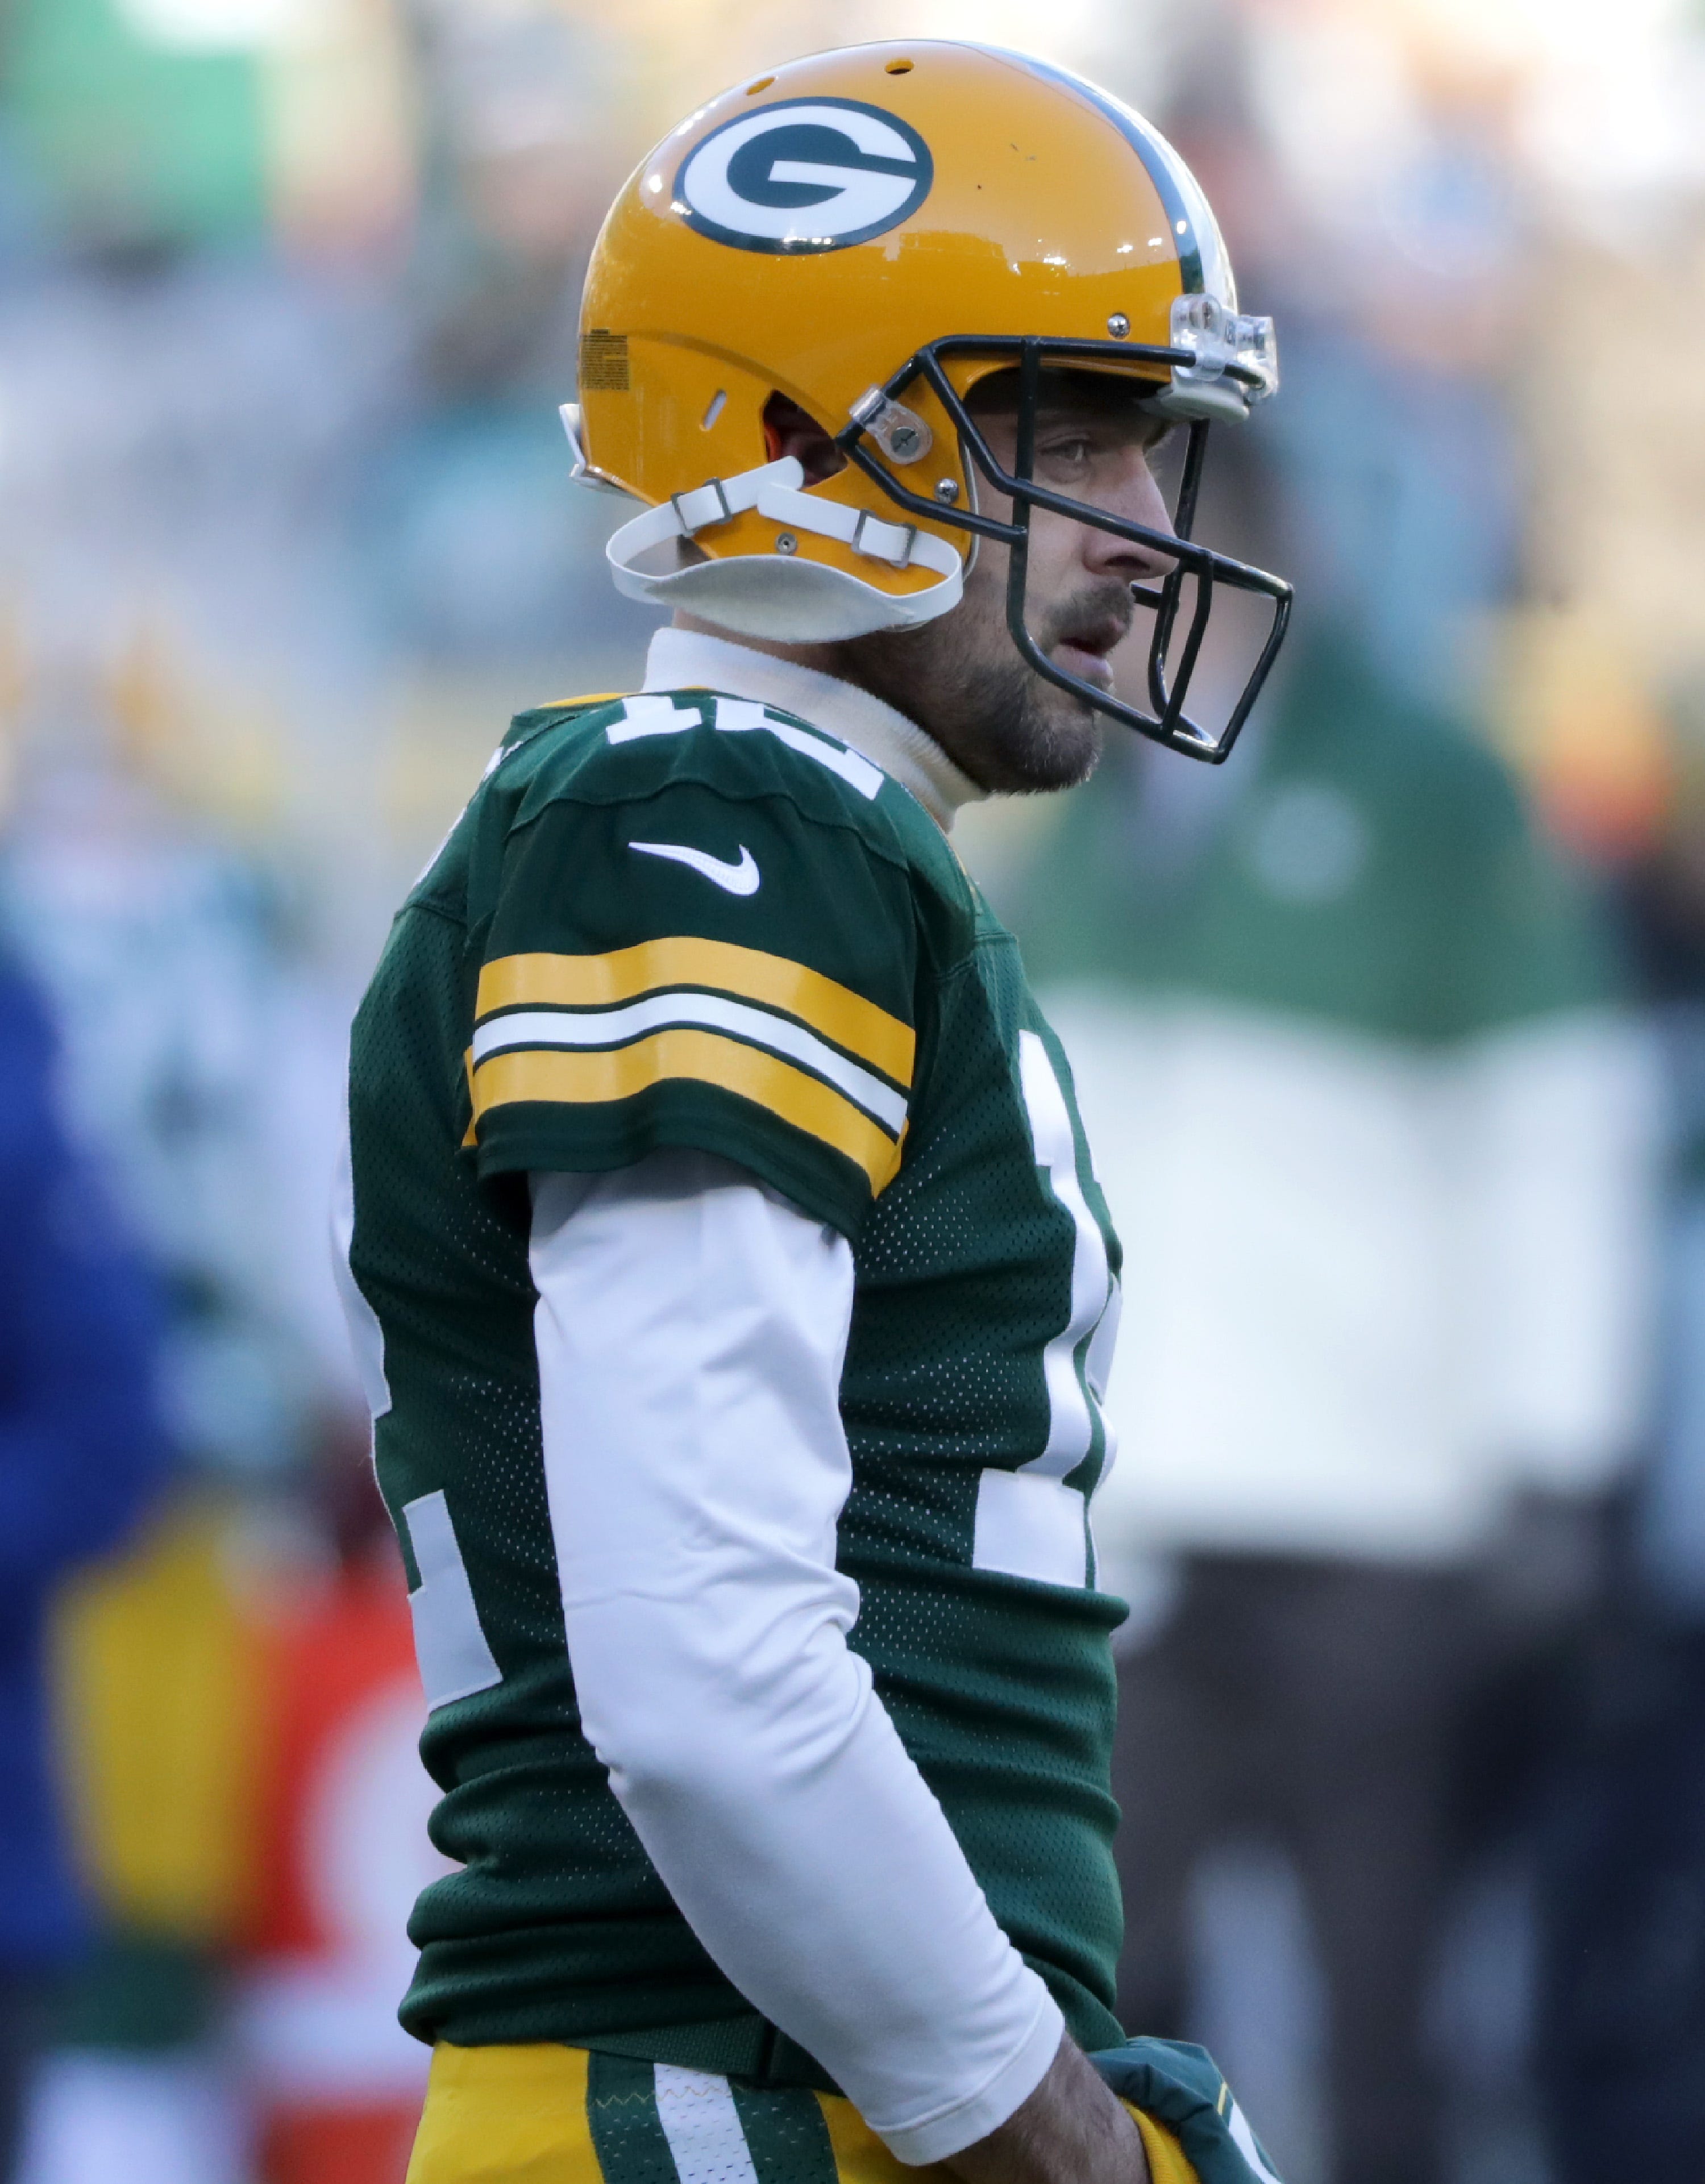 Green Bay Packers quarterback Aaron Rodgers (12) warms up before the Packers host the Chicago Bears on Sunday, December 15, 2019, at Lambeau Field in Green Bay, Wis.